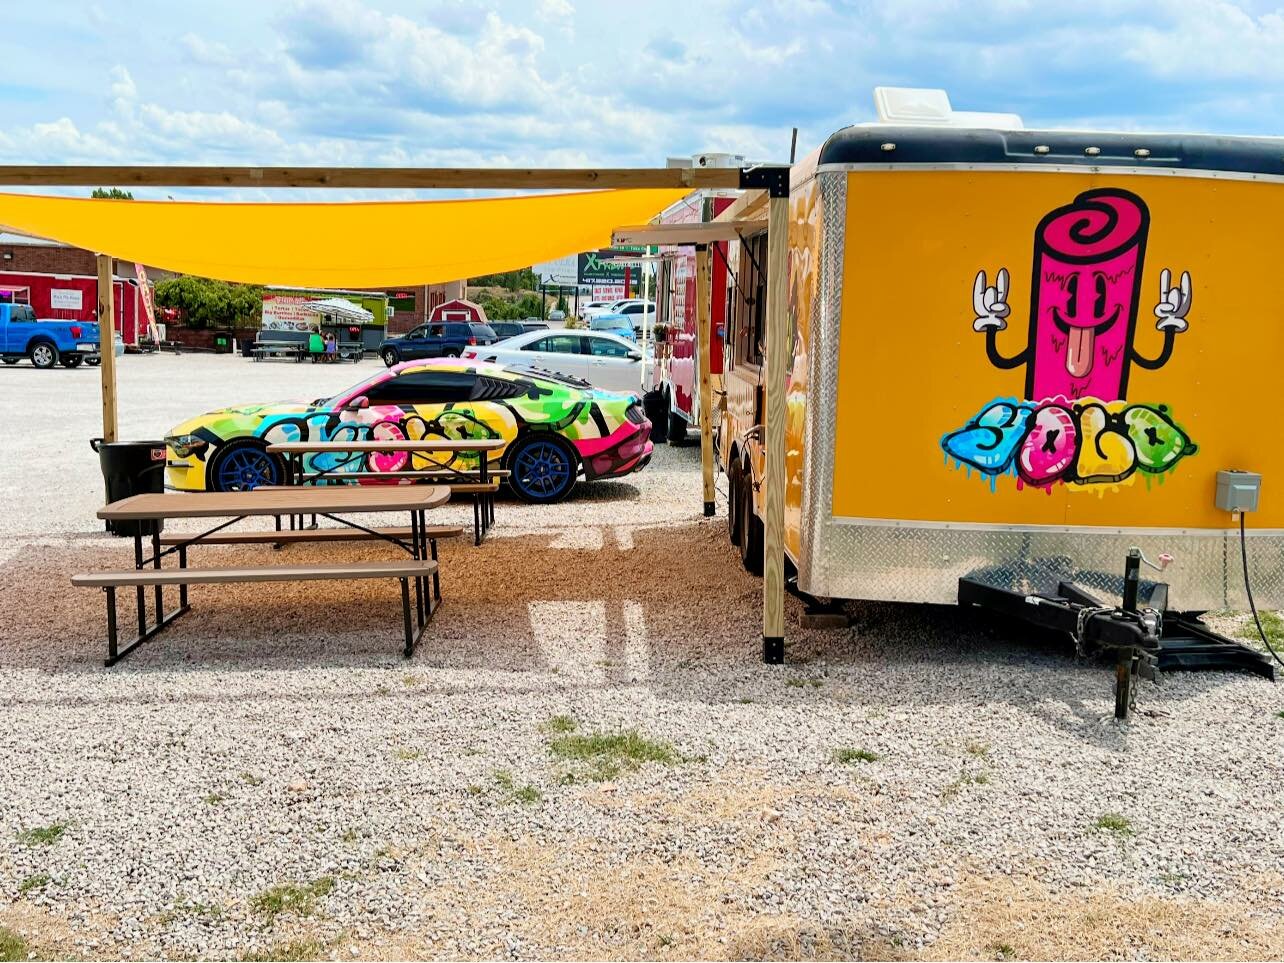 The food truck for Yolo Rolled Ice Cream operates at 2166 State Highway 248 in Branson.